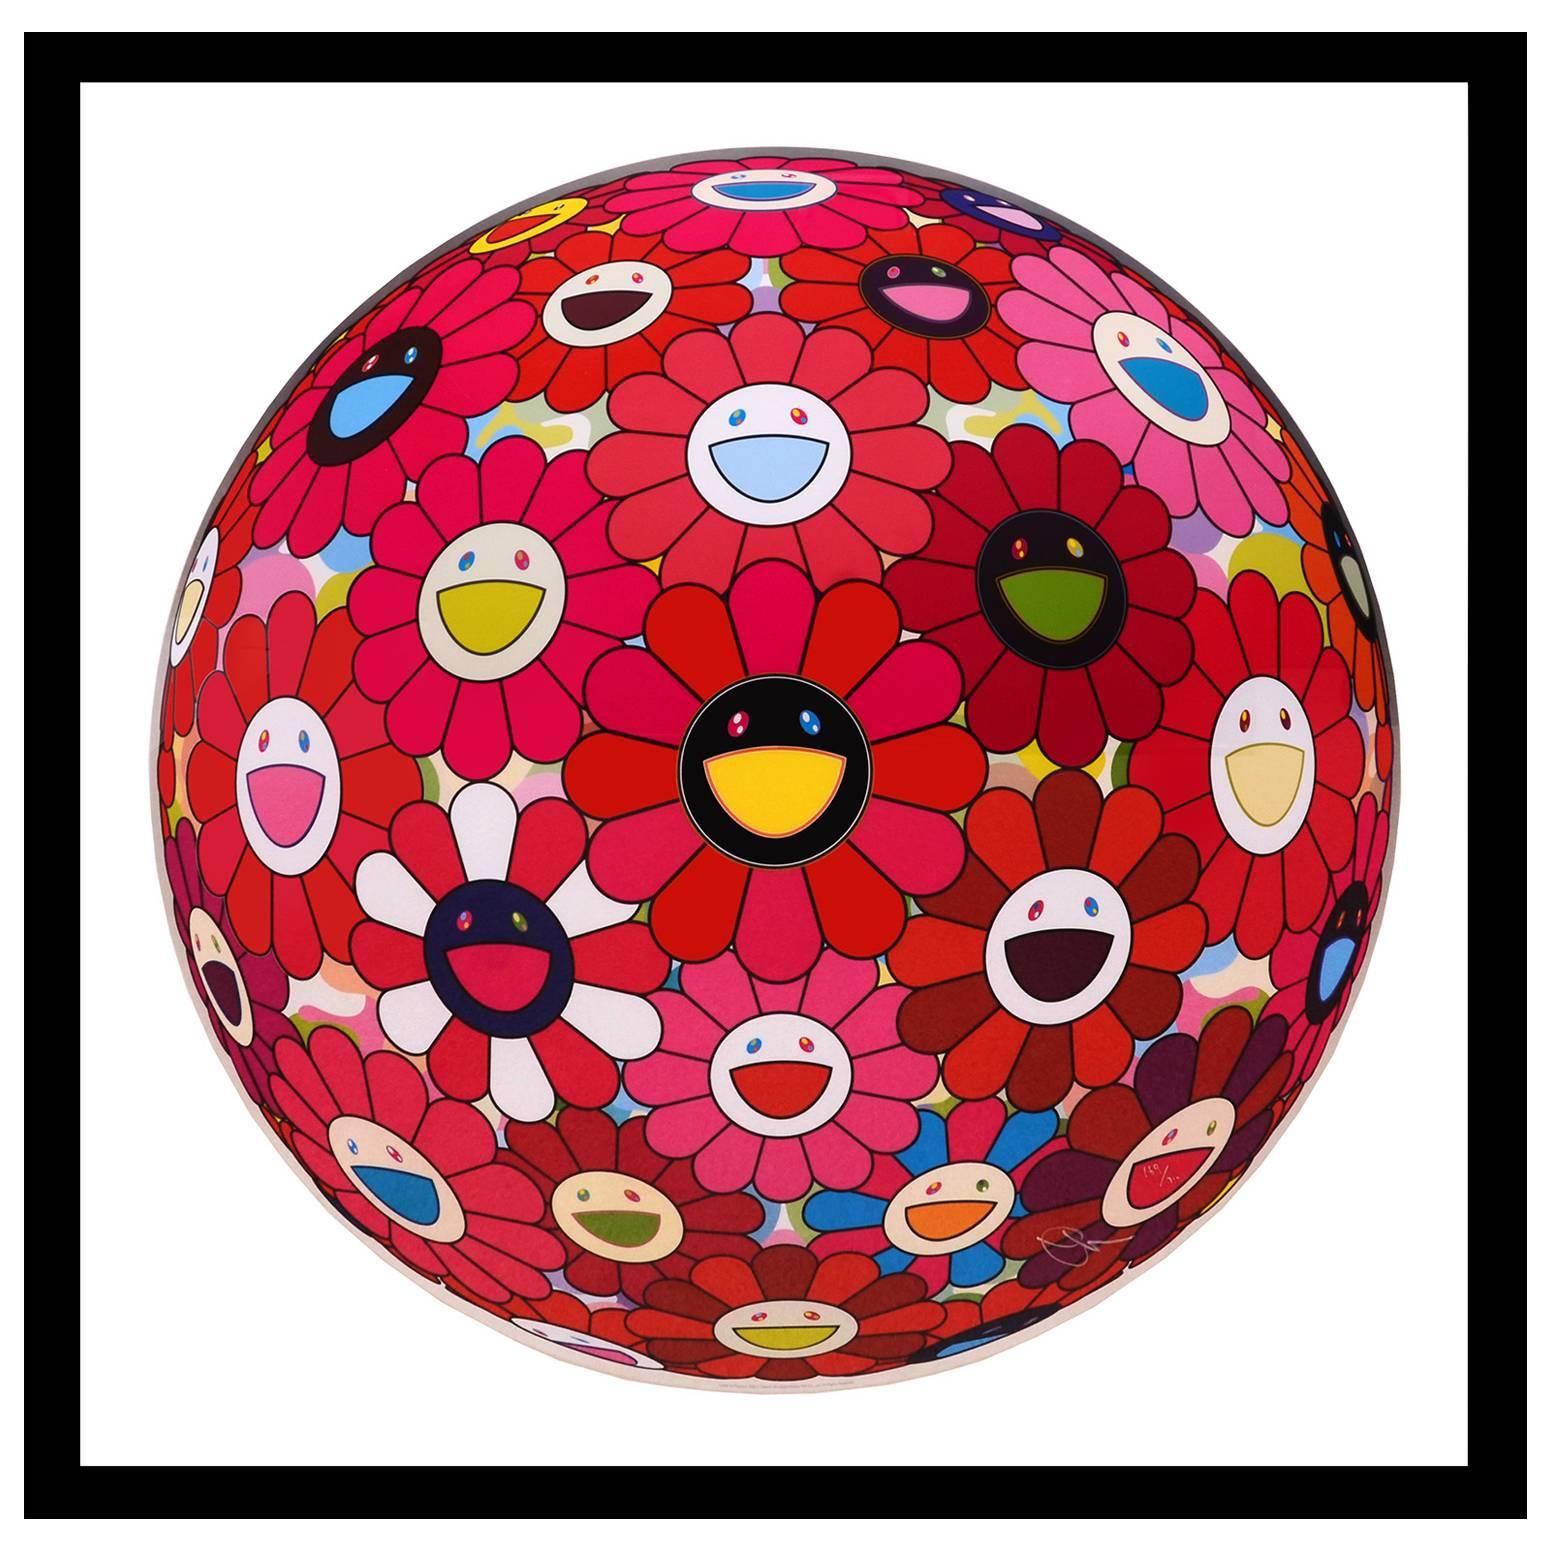 Takashi Murakami "Letter to Picasso" Lithograph For Sale